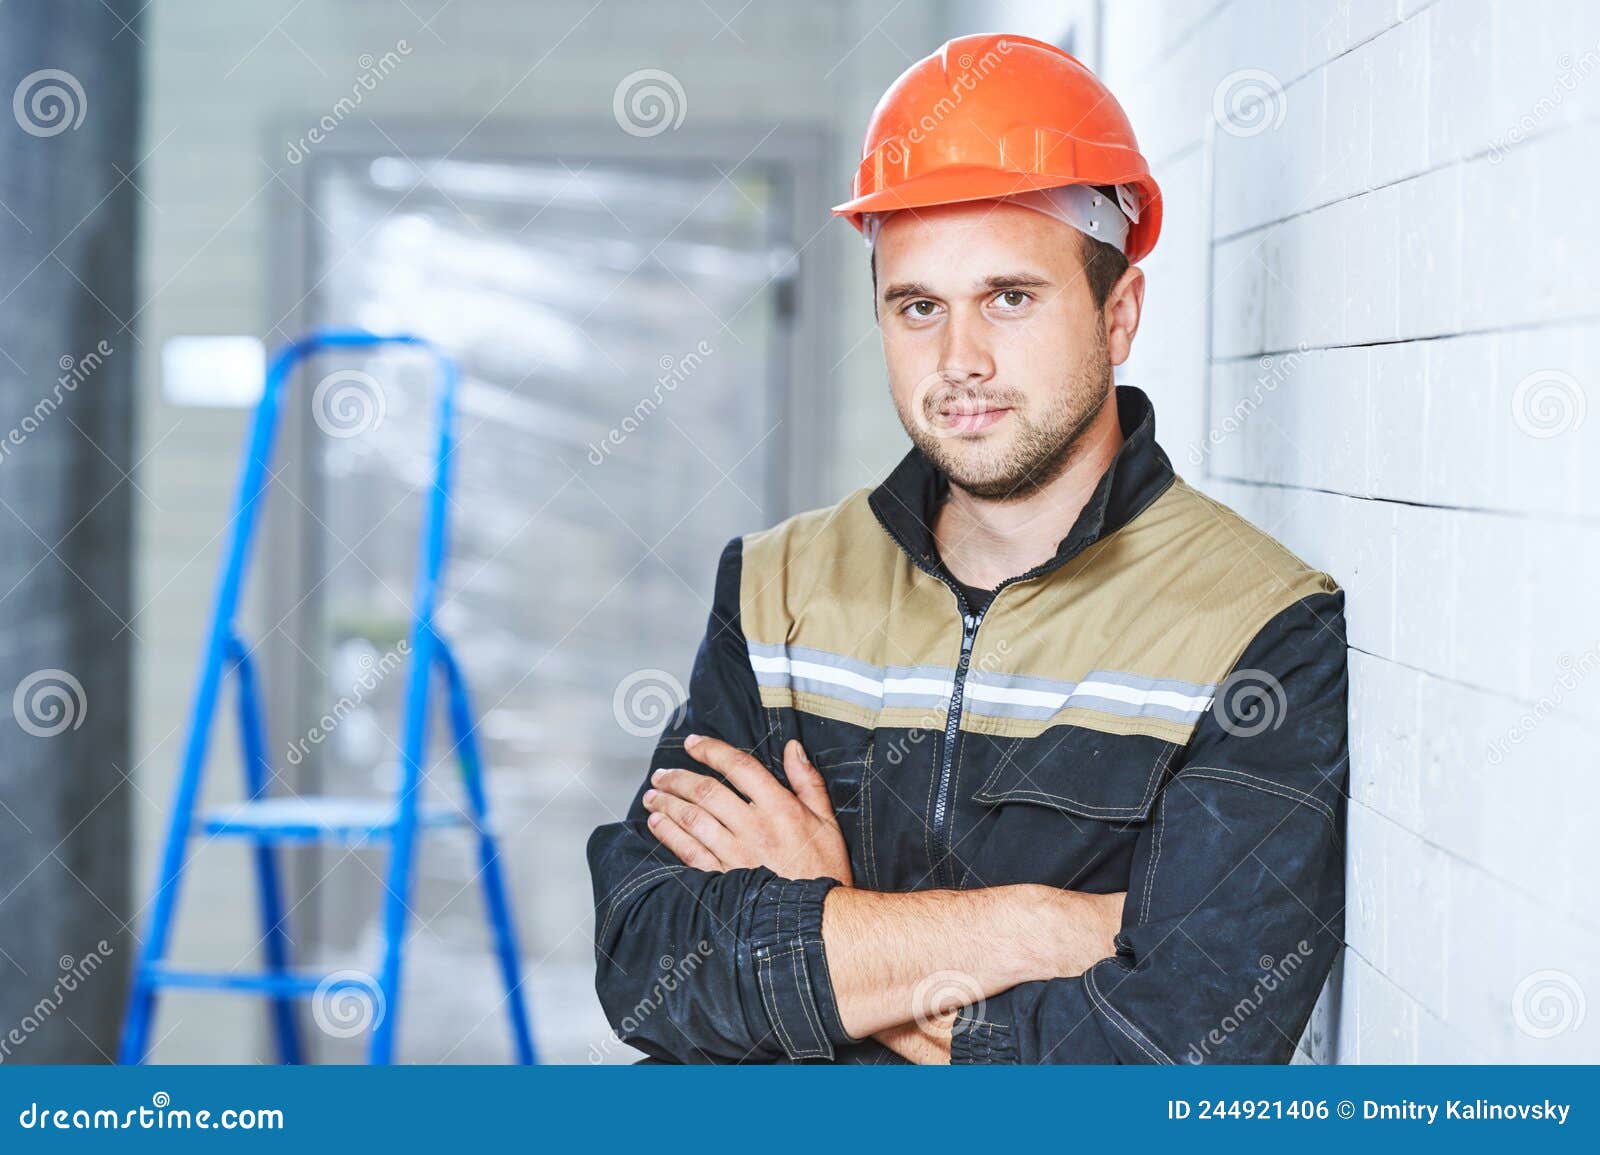 construction worker portrait indoors. concept of building or service employee